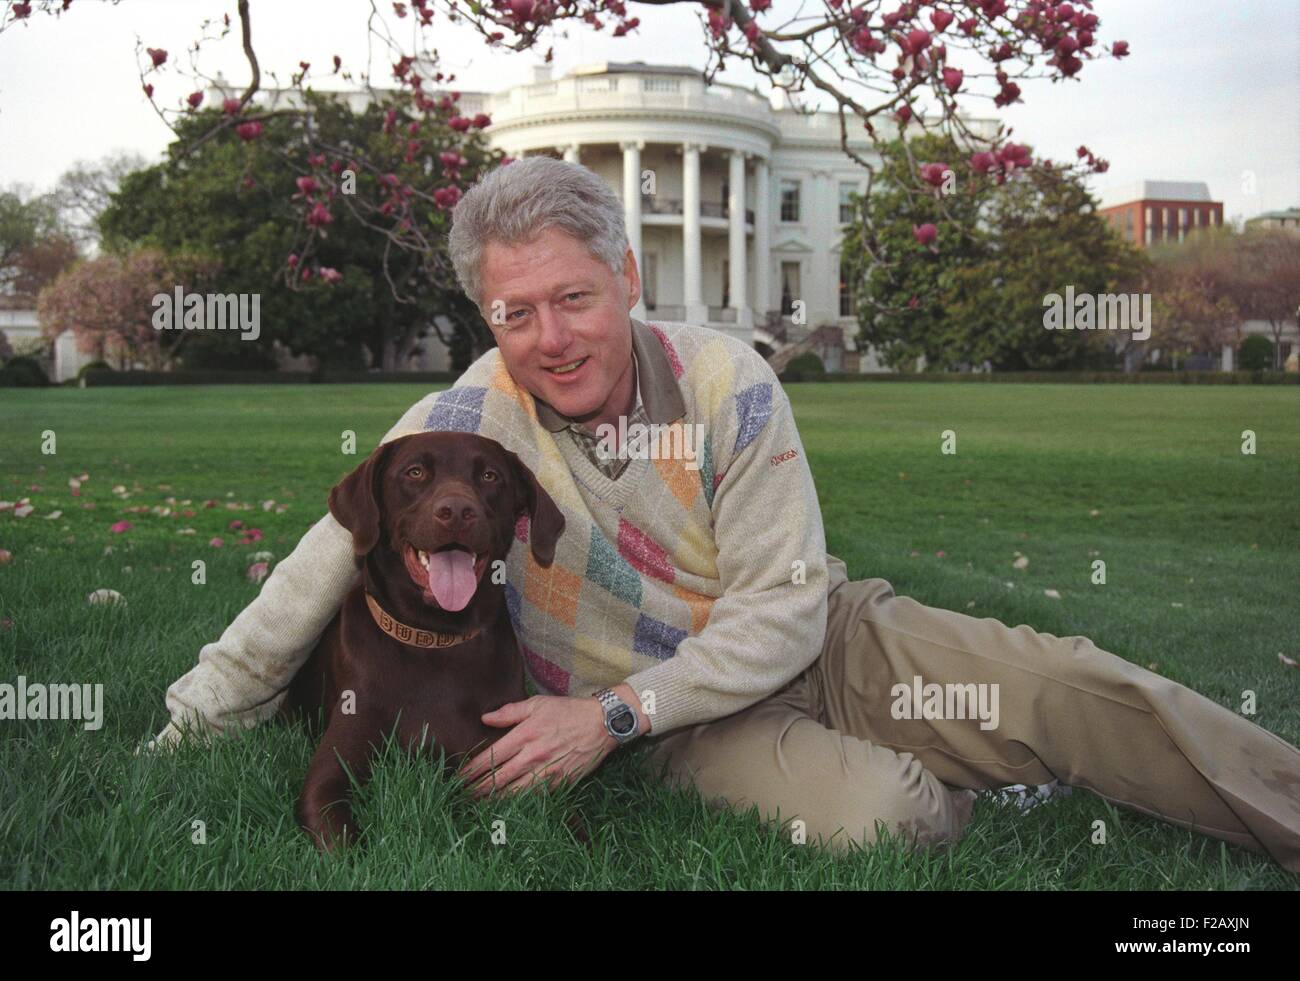 President Bill Clinton with his a male chocolate-colored Labrador Retriever, Buddy. Clinton acquired Buddy as a 3-month-old puppy in Dec. 1997, when his inappropriate relationship with a White House intern had created a major scandal. (BSLOC 2015 2 204) Stock Photo